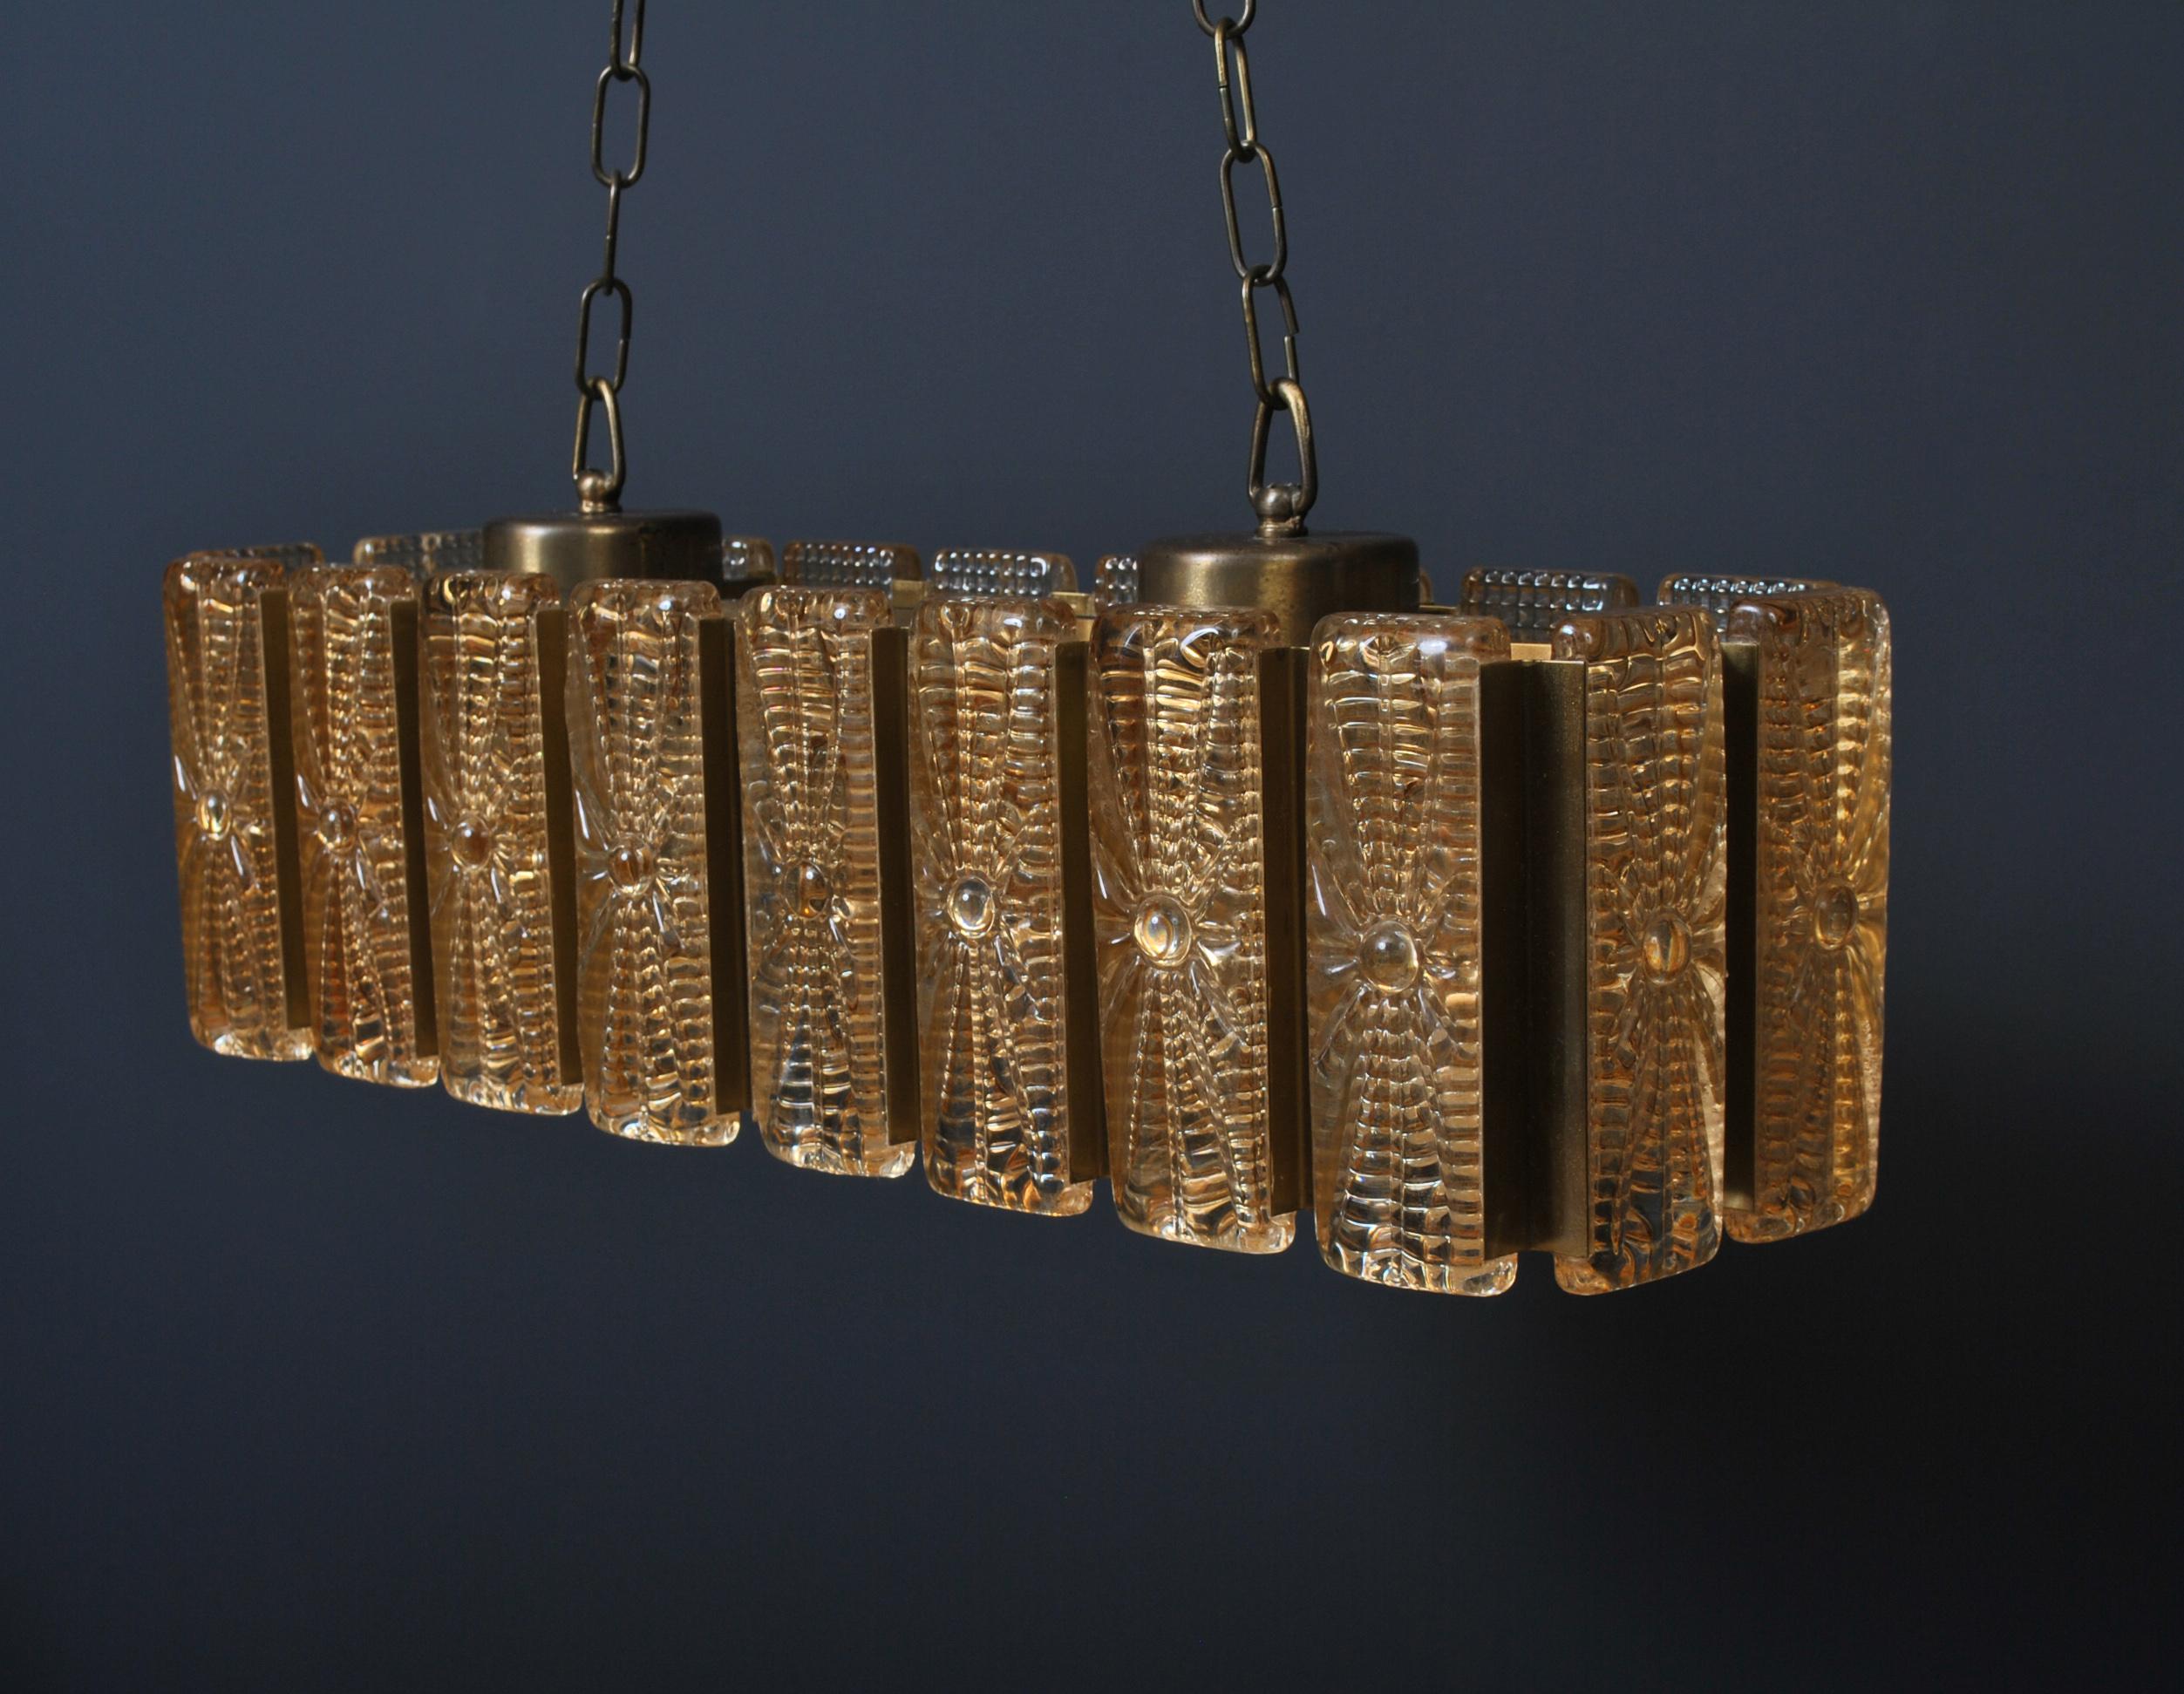 Glass and brass rectangular pendant chandelier light by Vitrika Design, Denmark circa 1960. Golden hue glass blocks with clear inner cut glass cylinders. Current drop with chain is 110cm but can be adjusted.